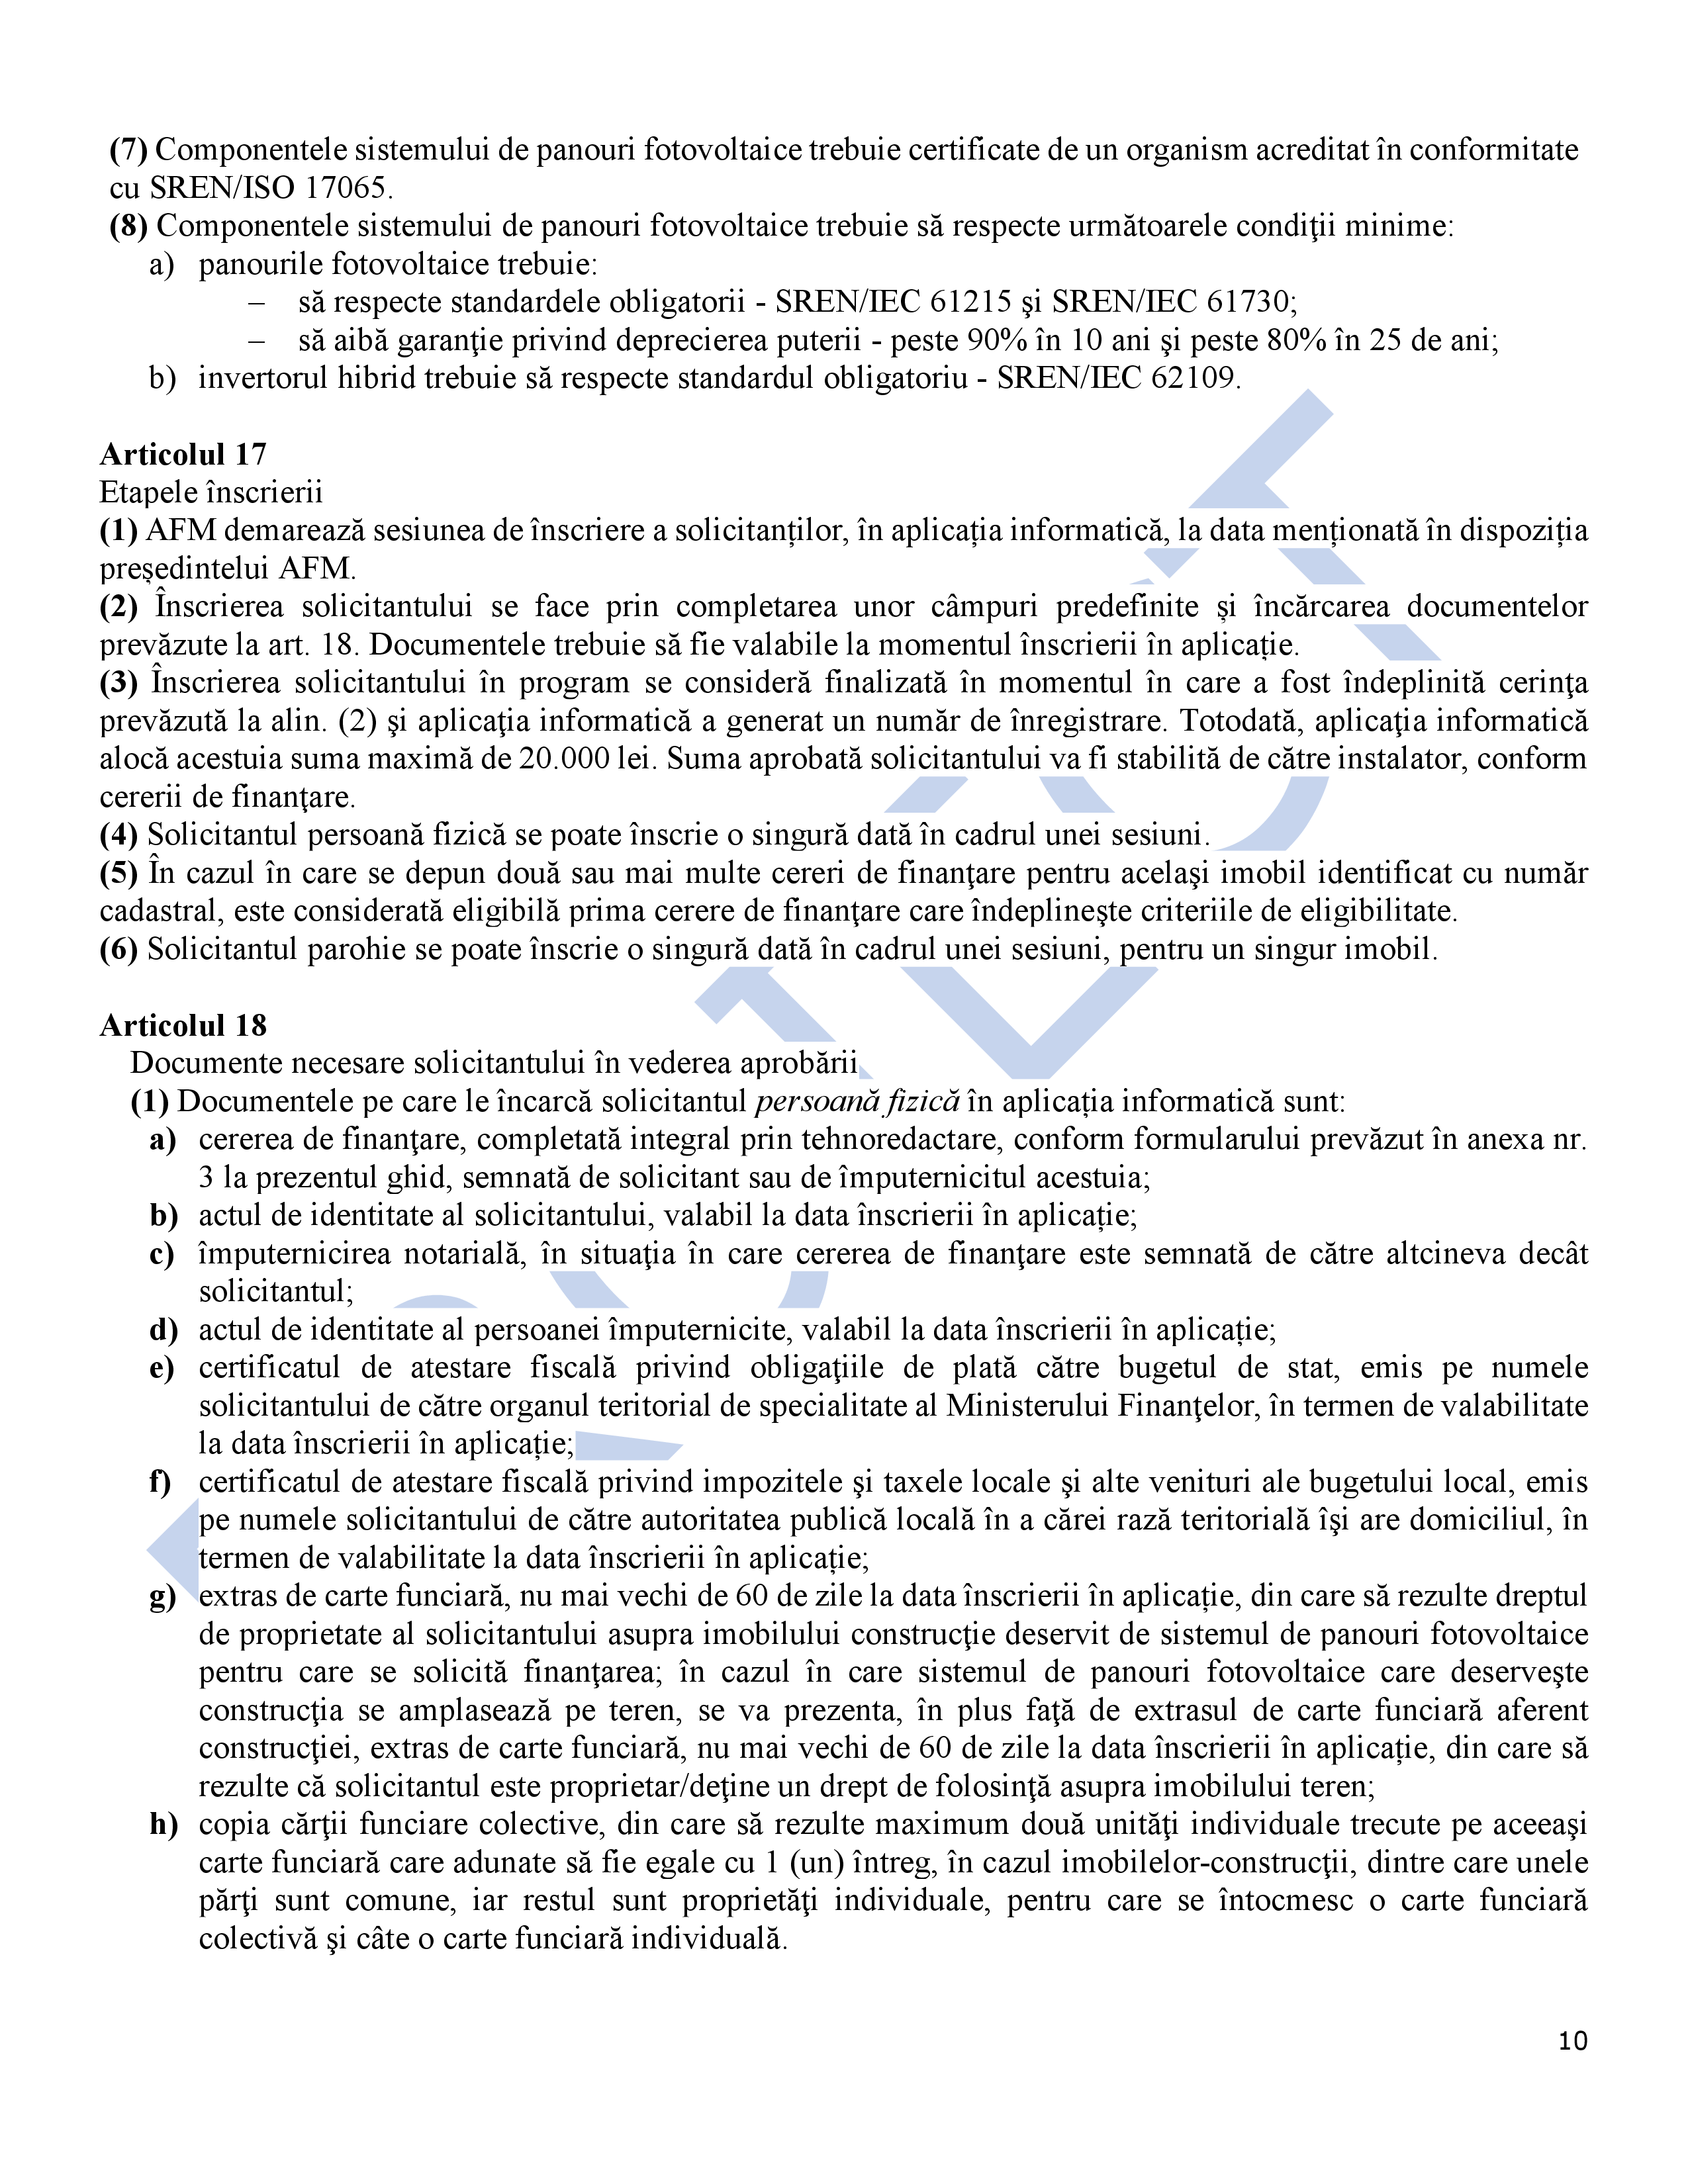 Pagina 10 - ghid_fotovoltaice_2023 